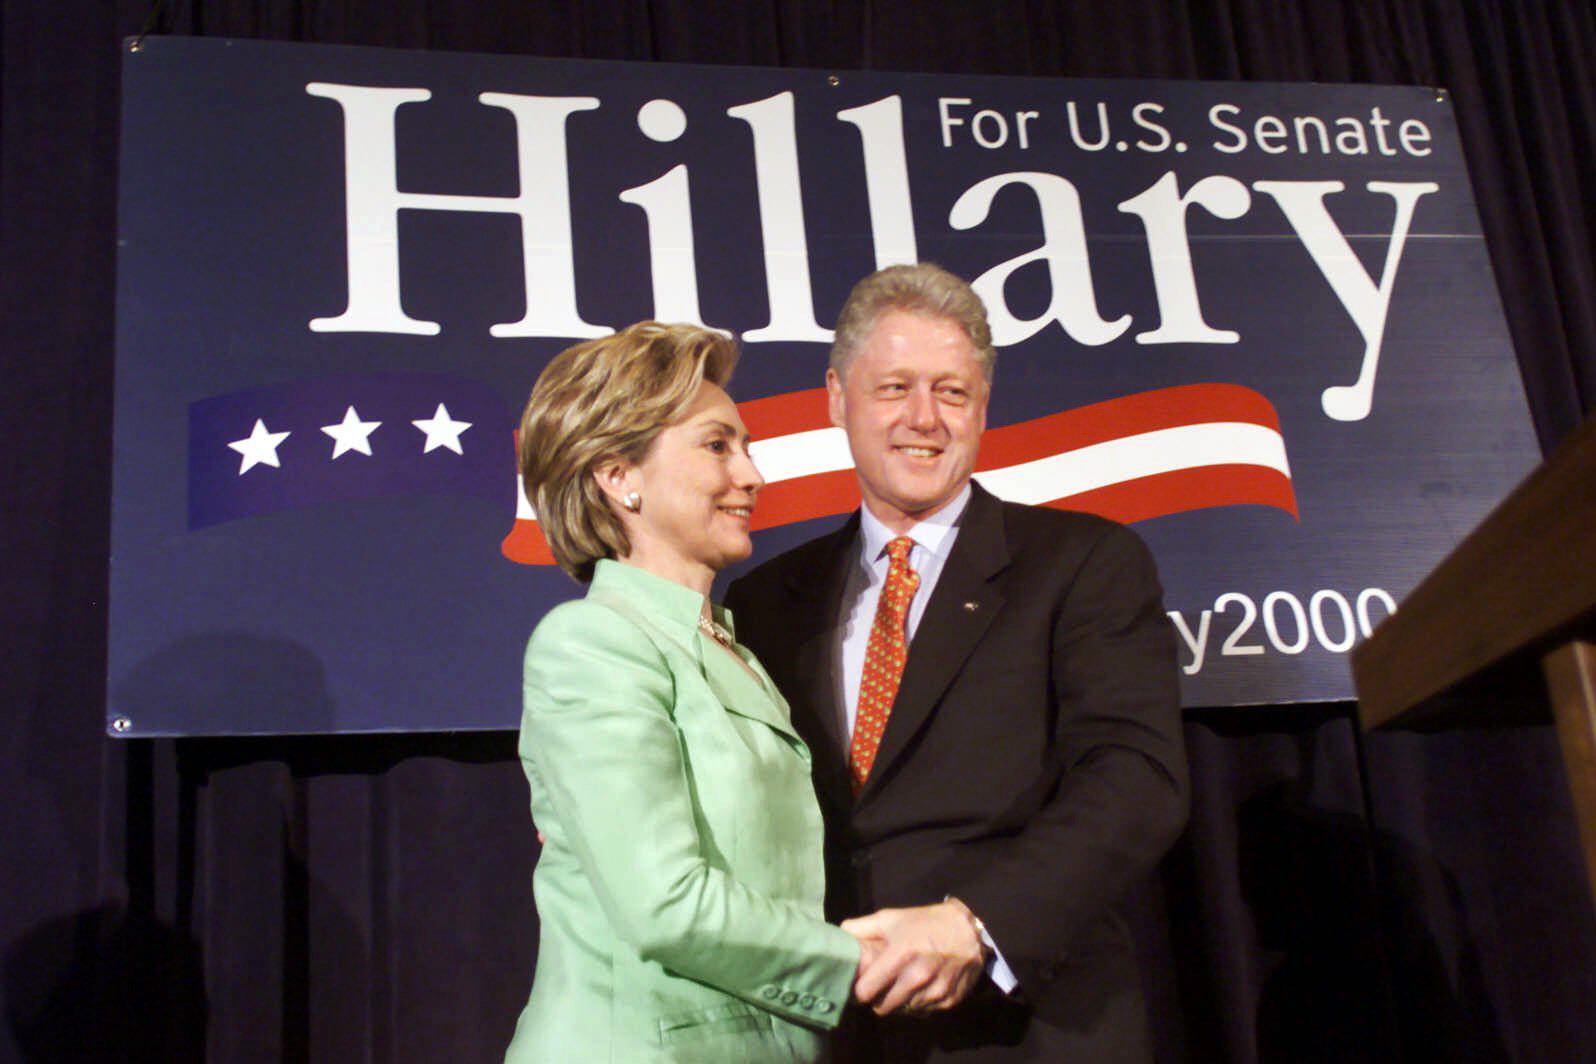 President Bill Clinton and First Lady Hillary Rodham Clinton embrace during the New York State Senate luncheon on July 29, 2000 in New York City.